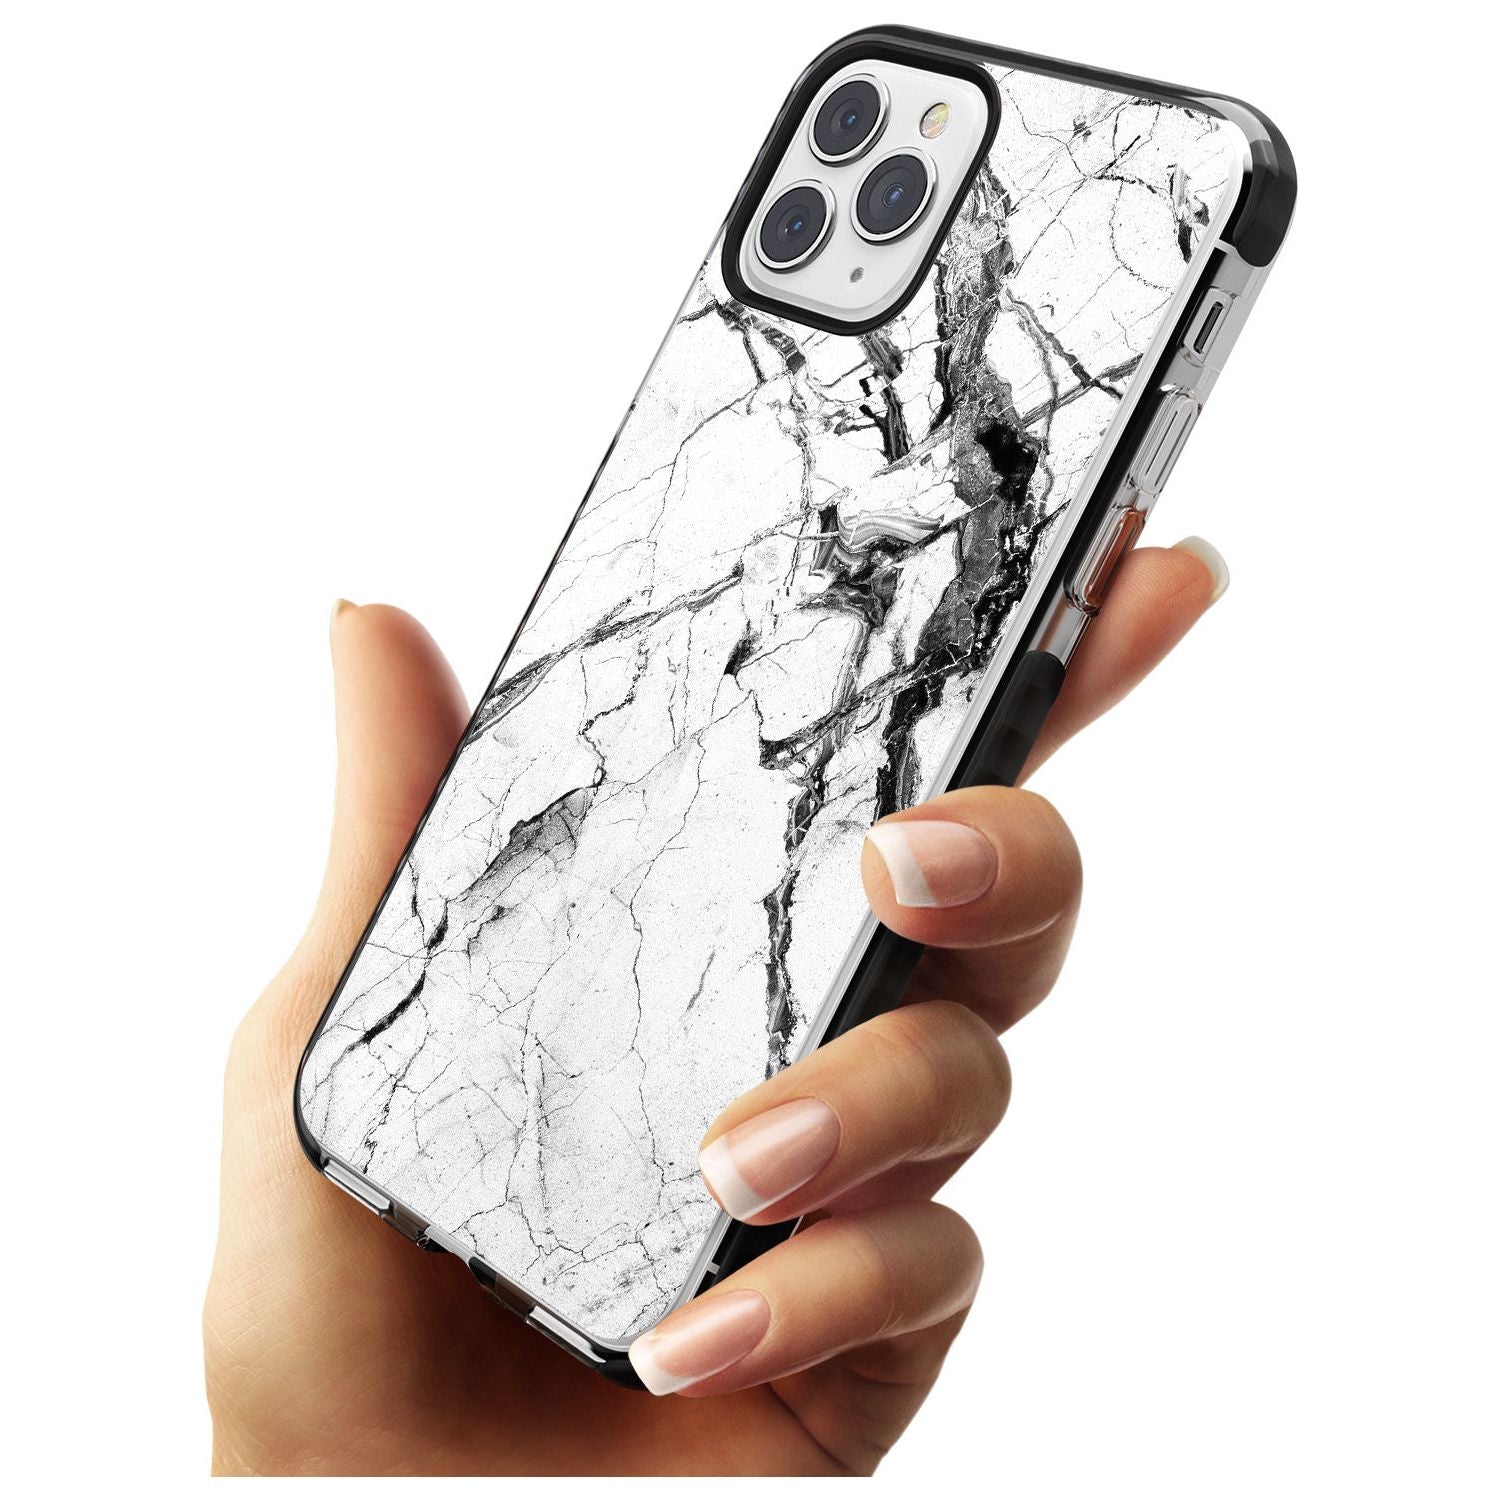 Black & White Stormy Marble Black Impact Phone Case for iPhone 11 Pro Max